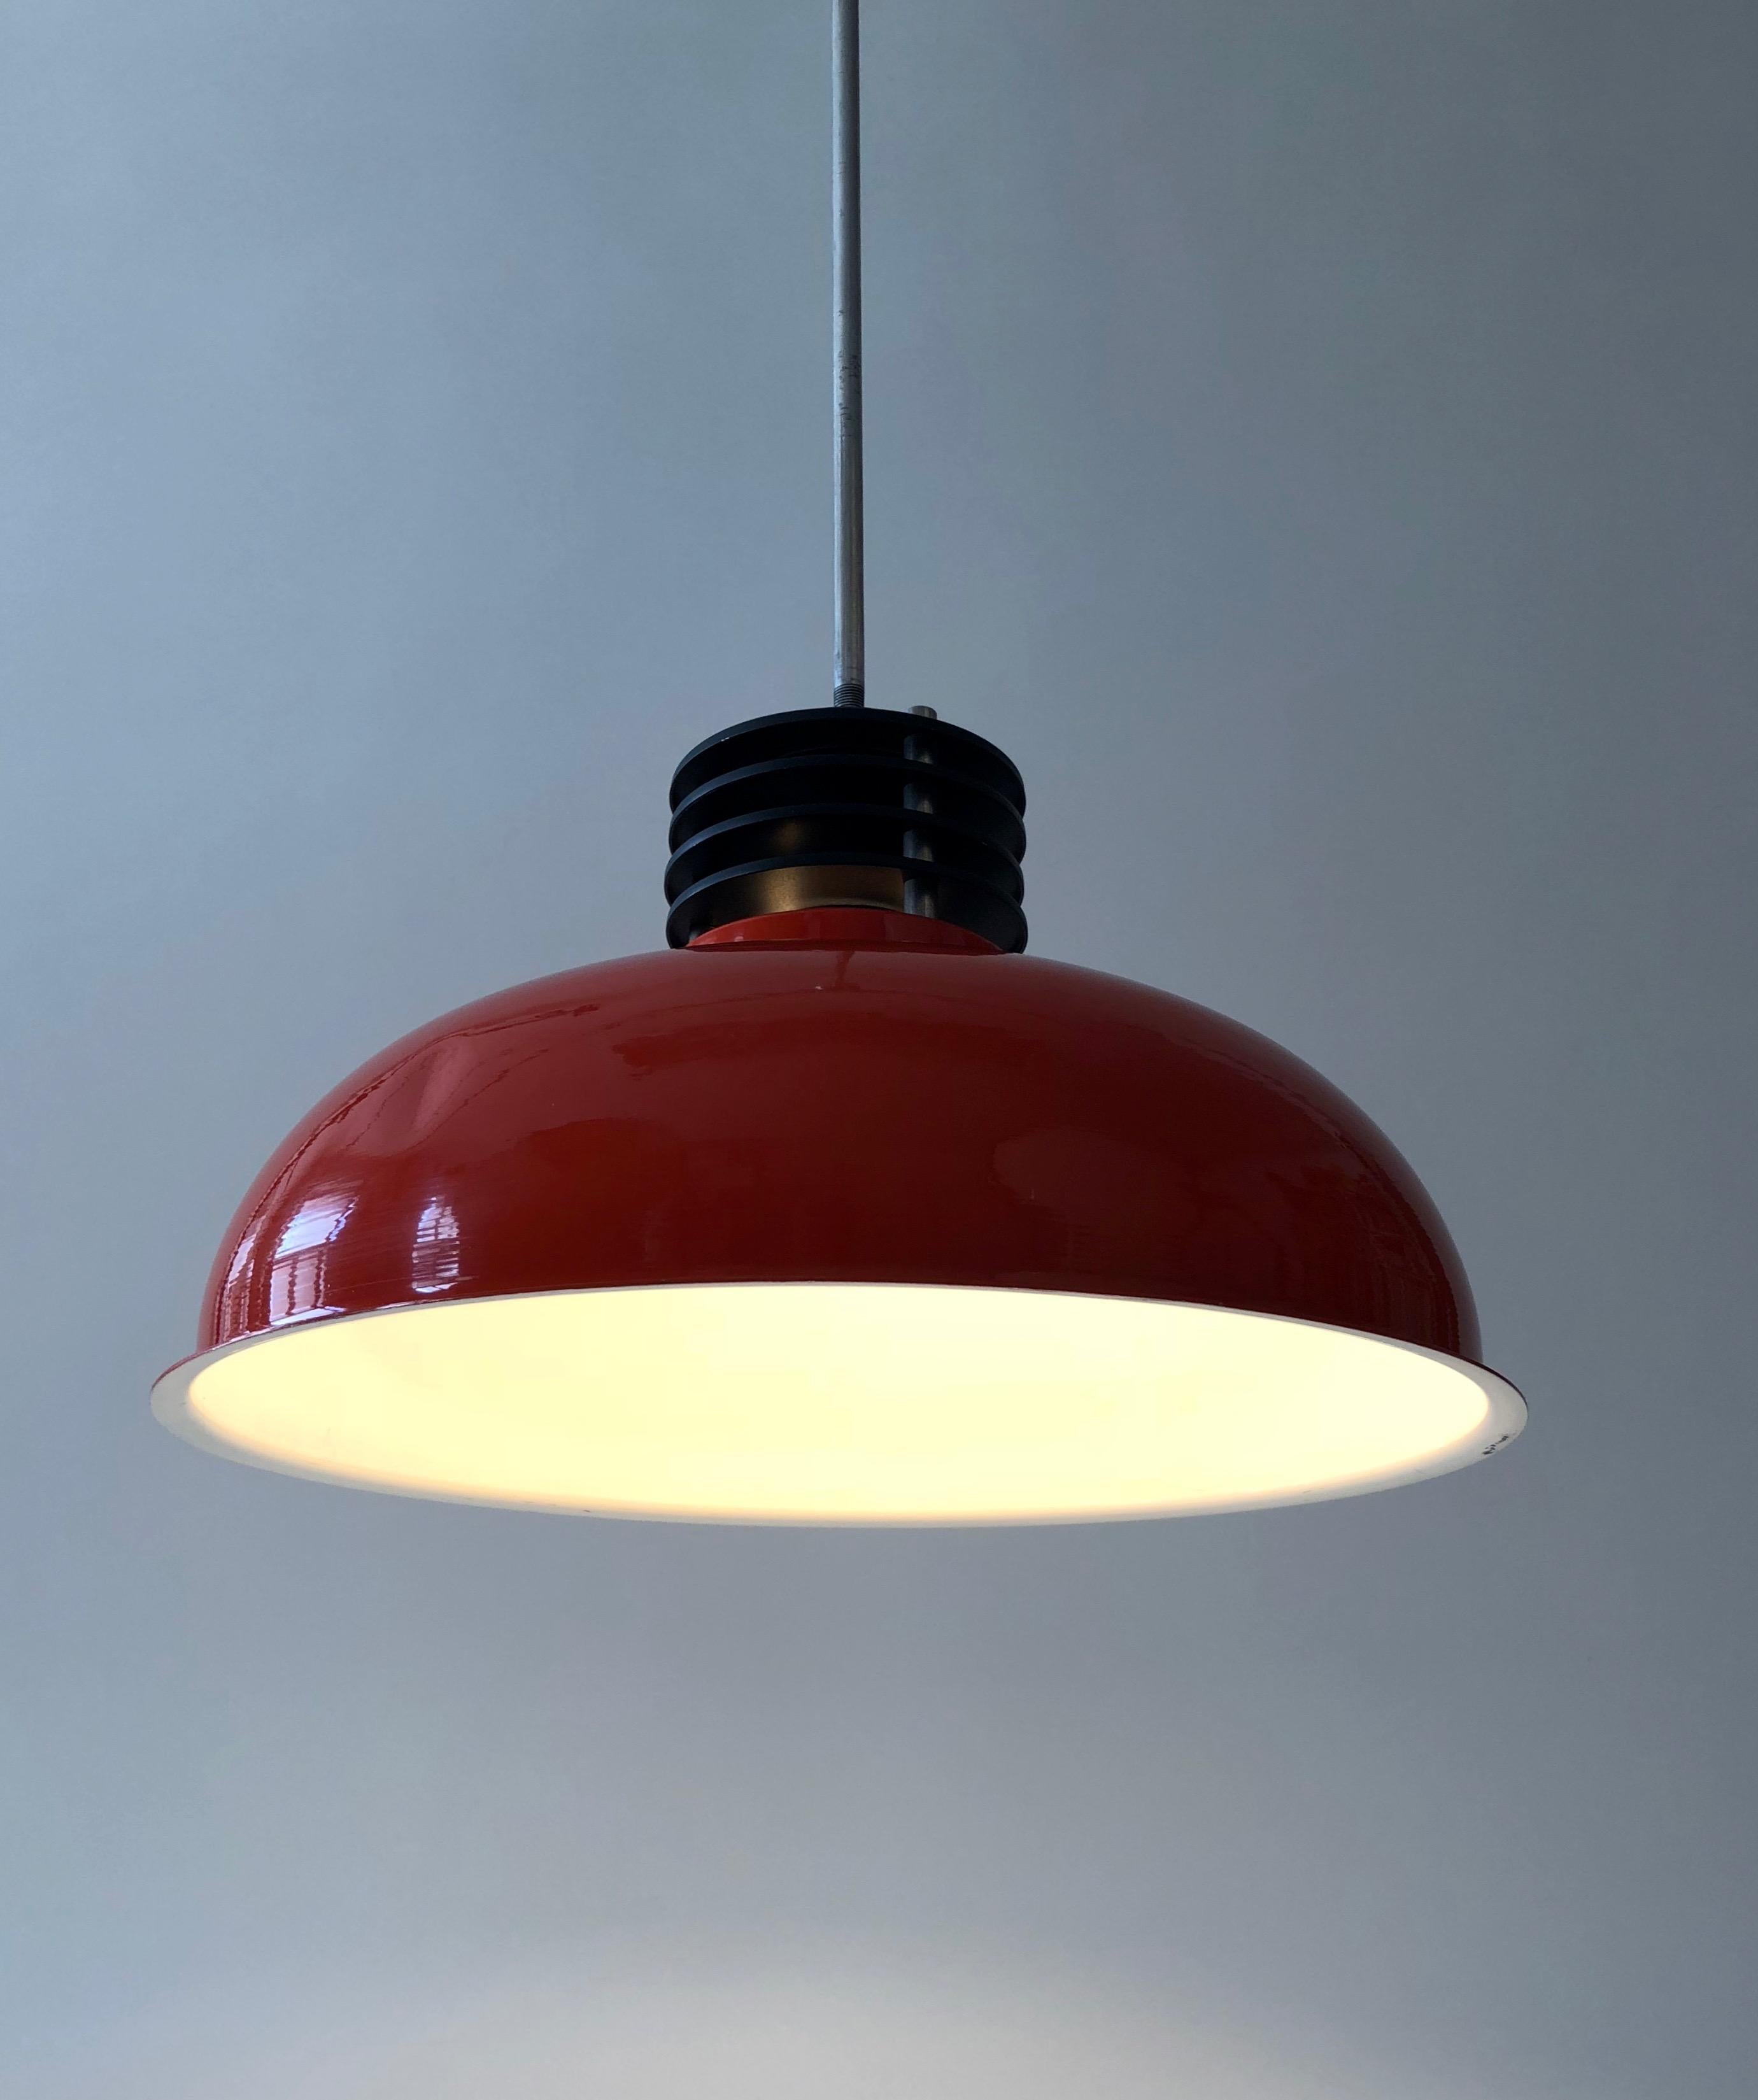 Three Industrial Styled Pendant Lamps from Hungary in Burnt Orange from the 70s For Sale 4